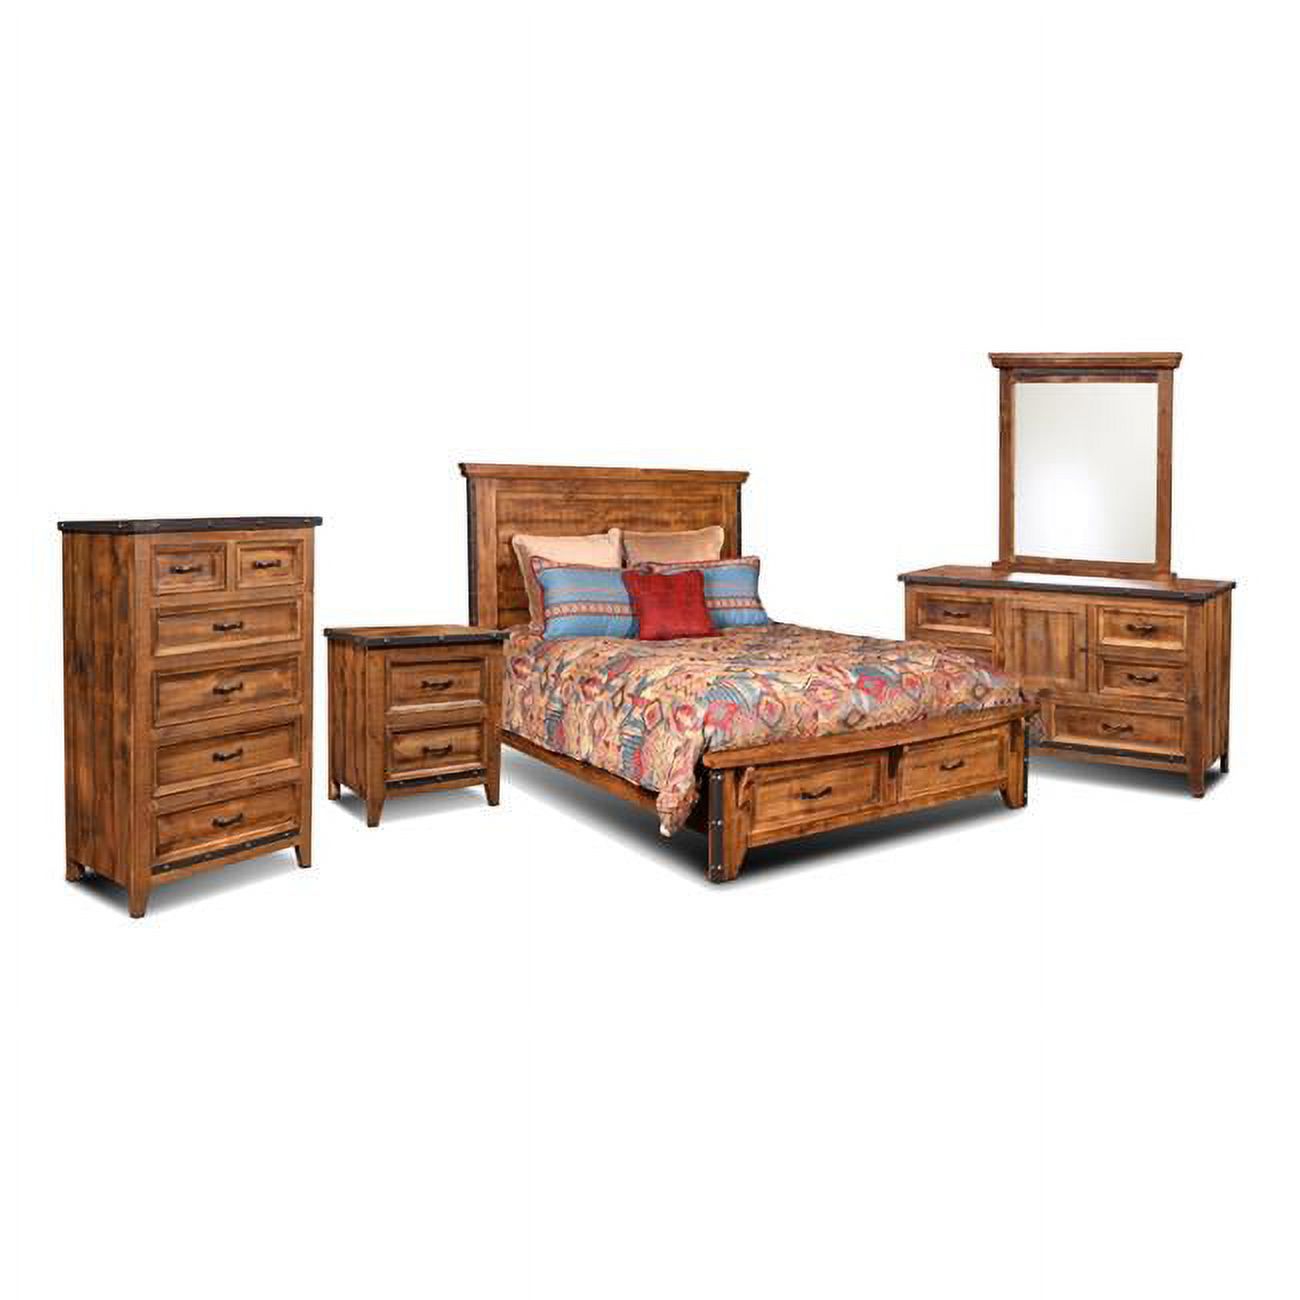 Sunset Trading Rustic City 5-Piece Contemporary Wood Queen Bedroom Set in Oak - image 1 of 7